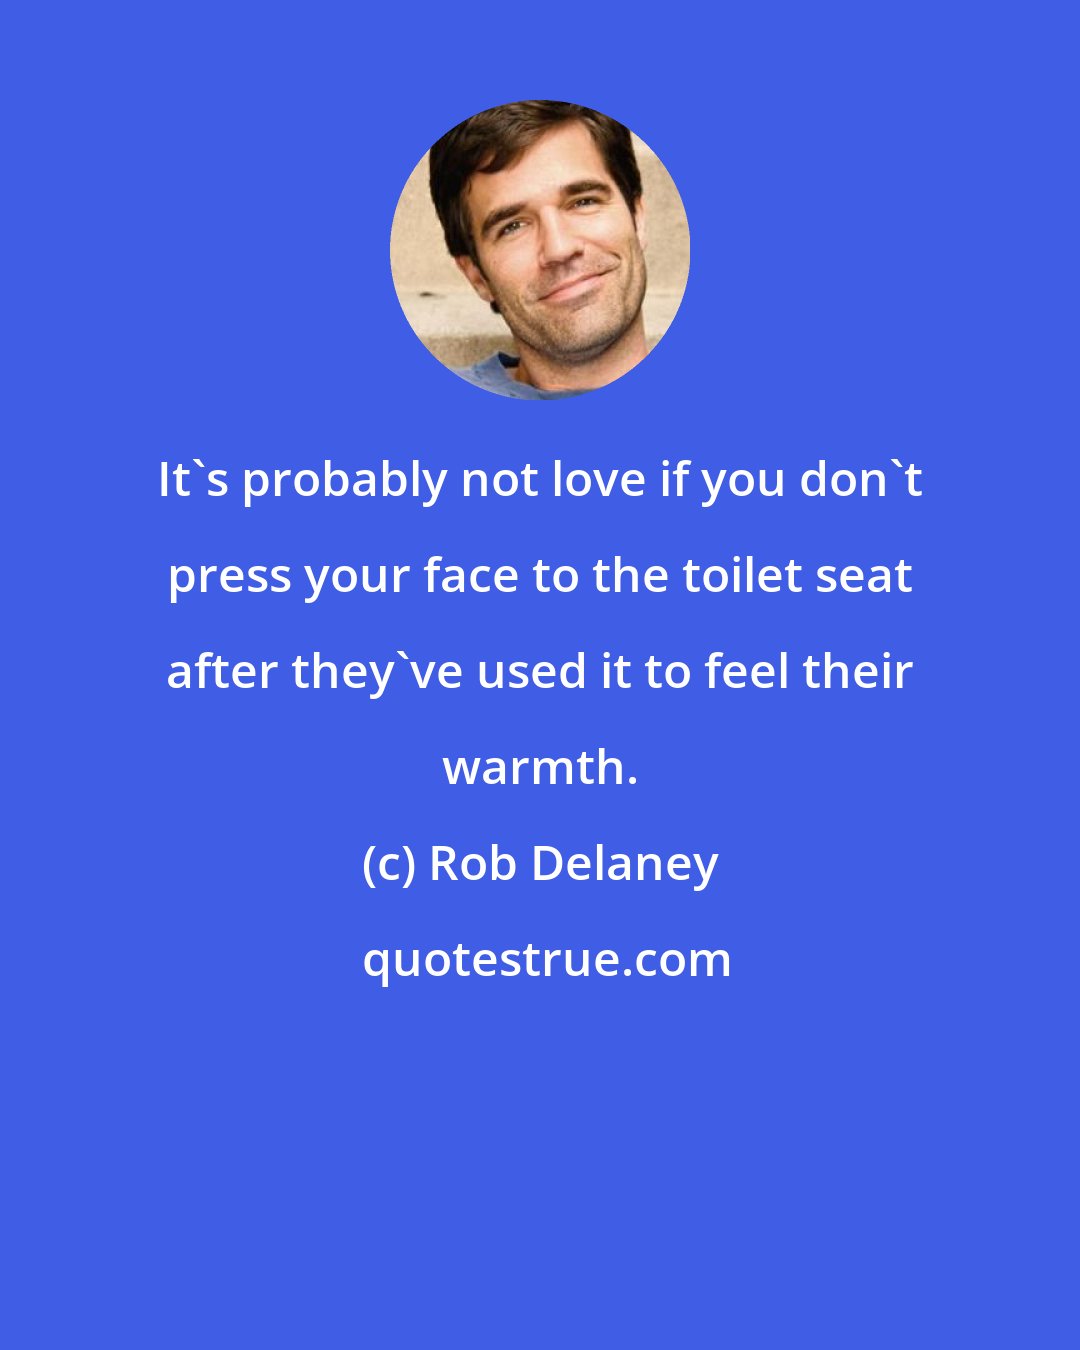 Rob Delaney: It's probably not love if you don't press your face to the toilet seat after they've used it to feel their warmth.